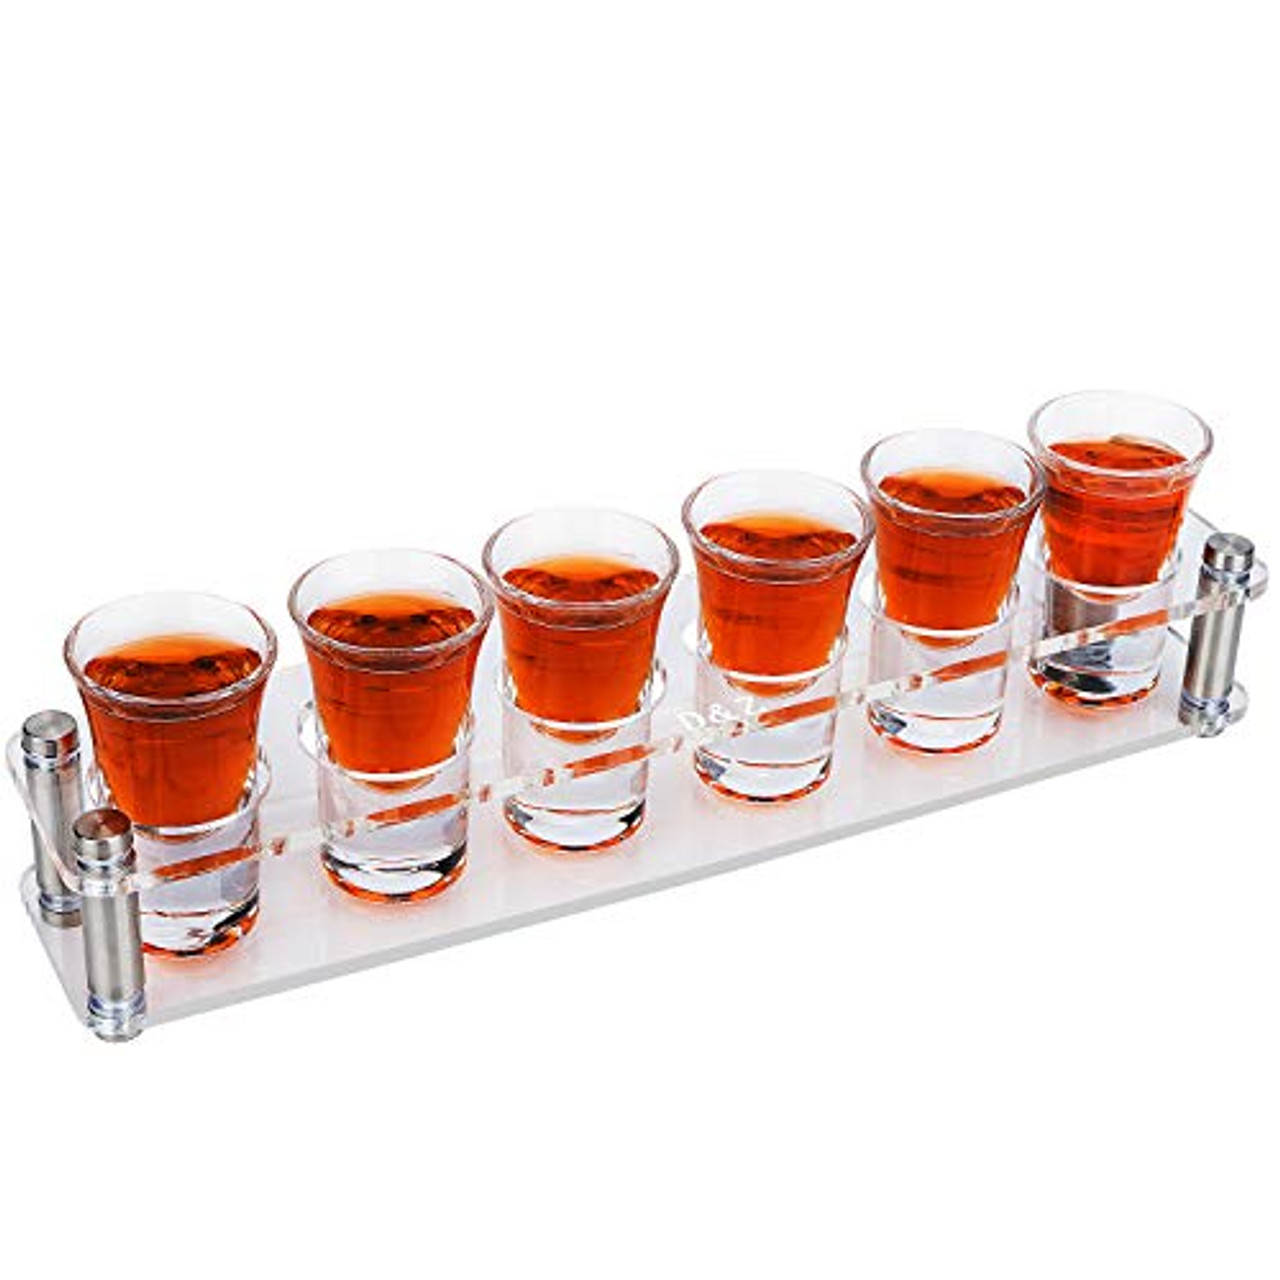 DZ Shot Glass Serving Tray with Shot Glasses, Shot Glass Holder Tray for  Bar Vodka and Tequila